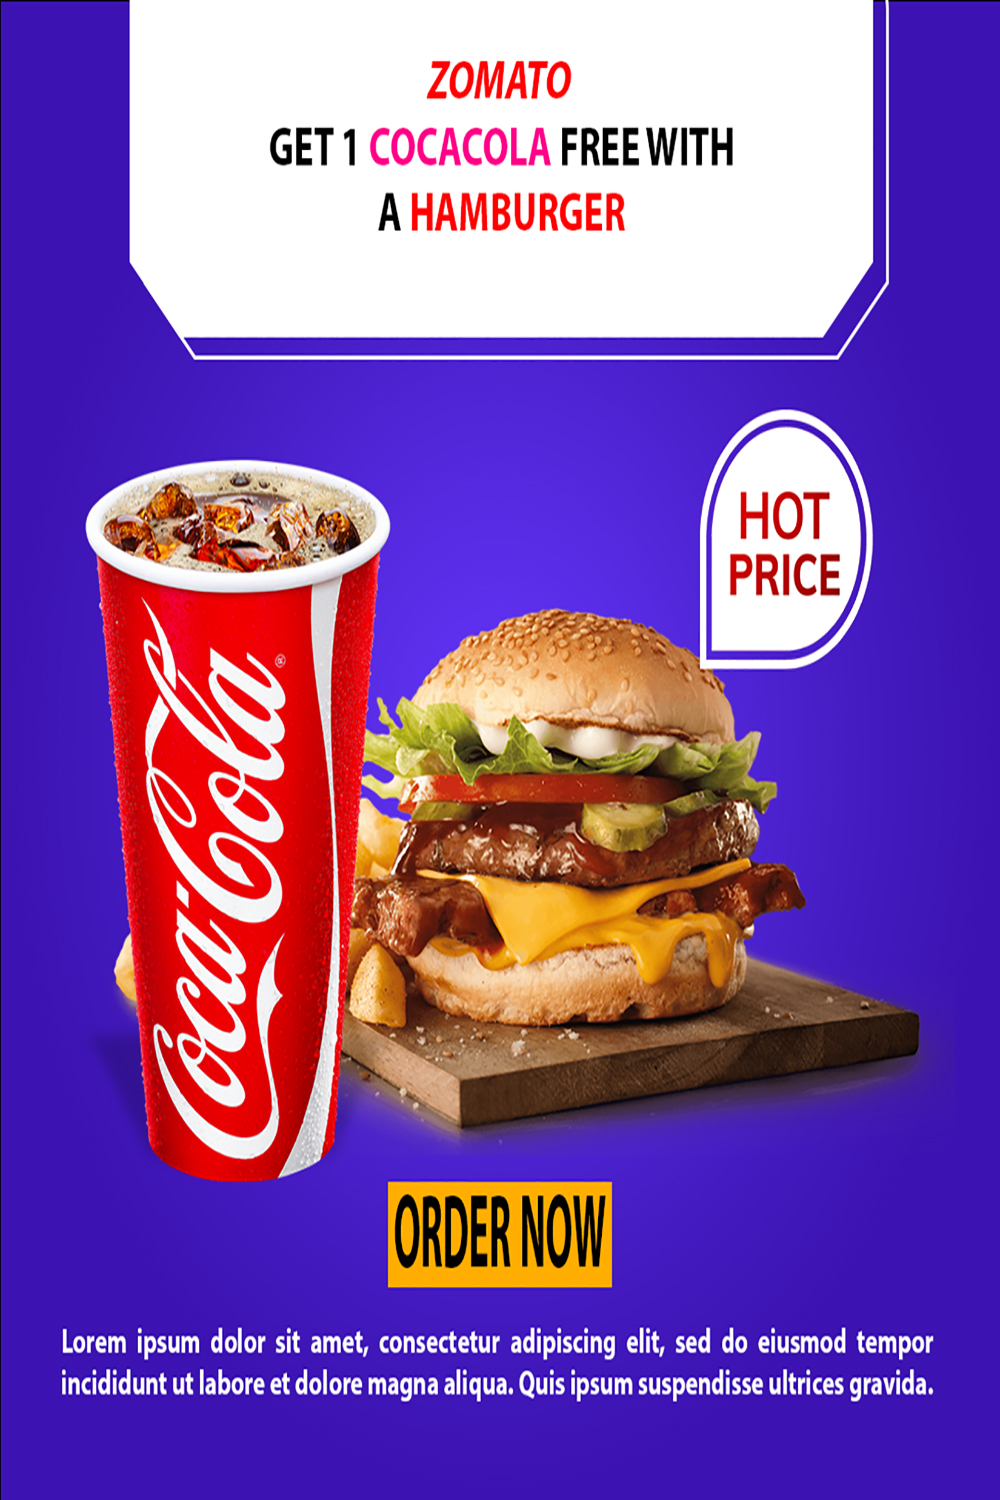 burger and cocacola social media poster design pinterest preview image.